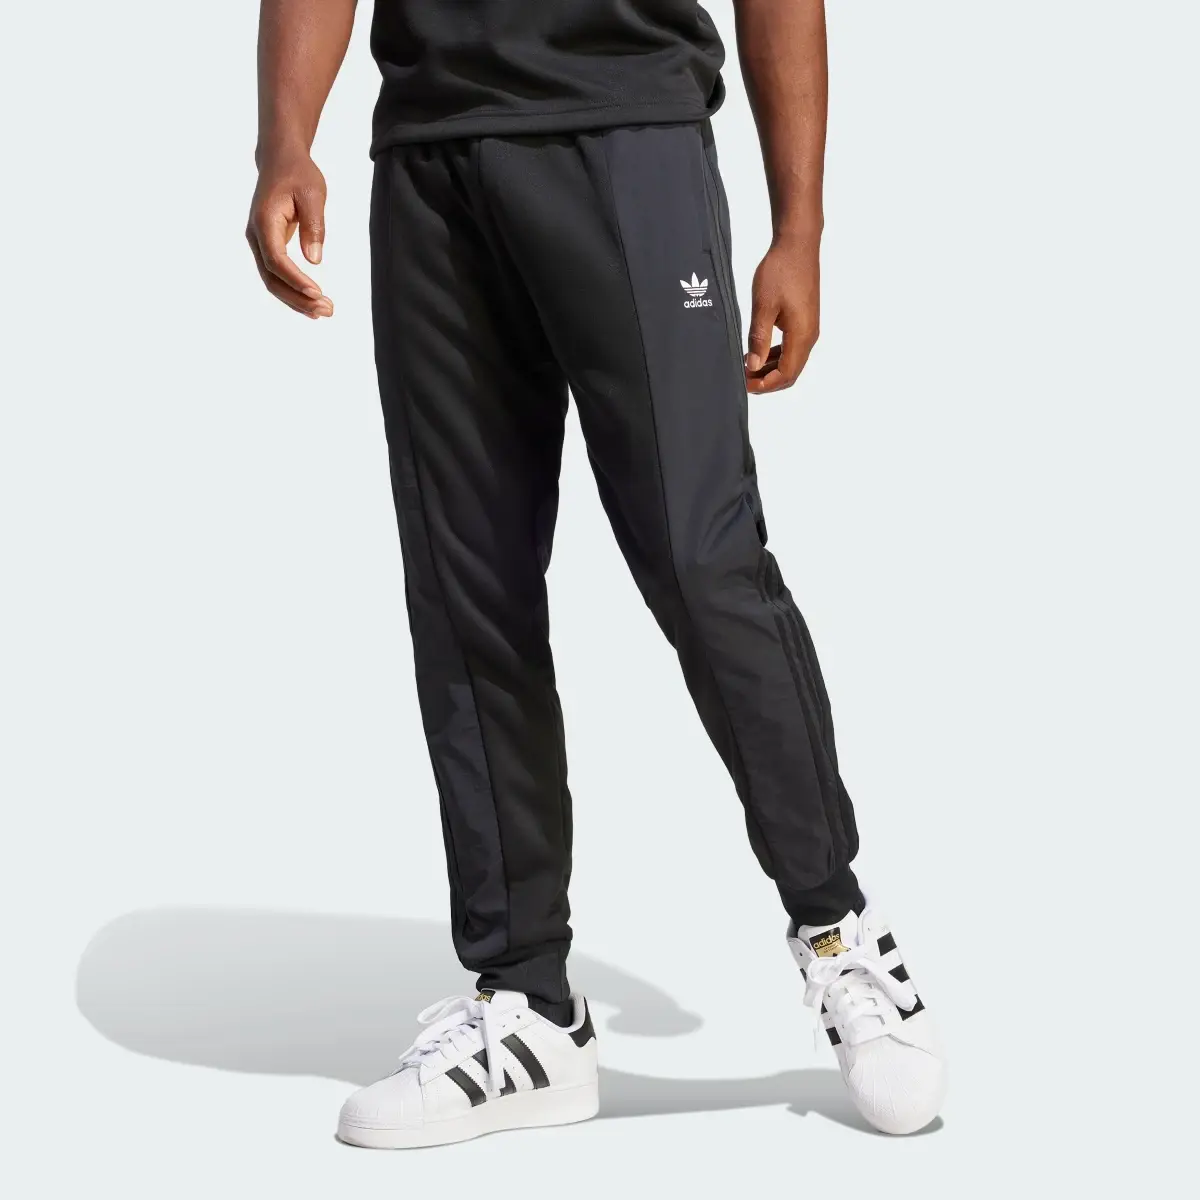 Adidas Adicolor Re-Pro SST Material Mix Track Pants. 1